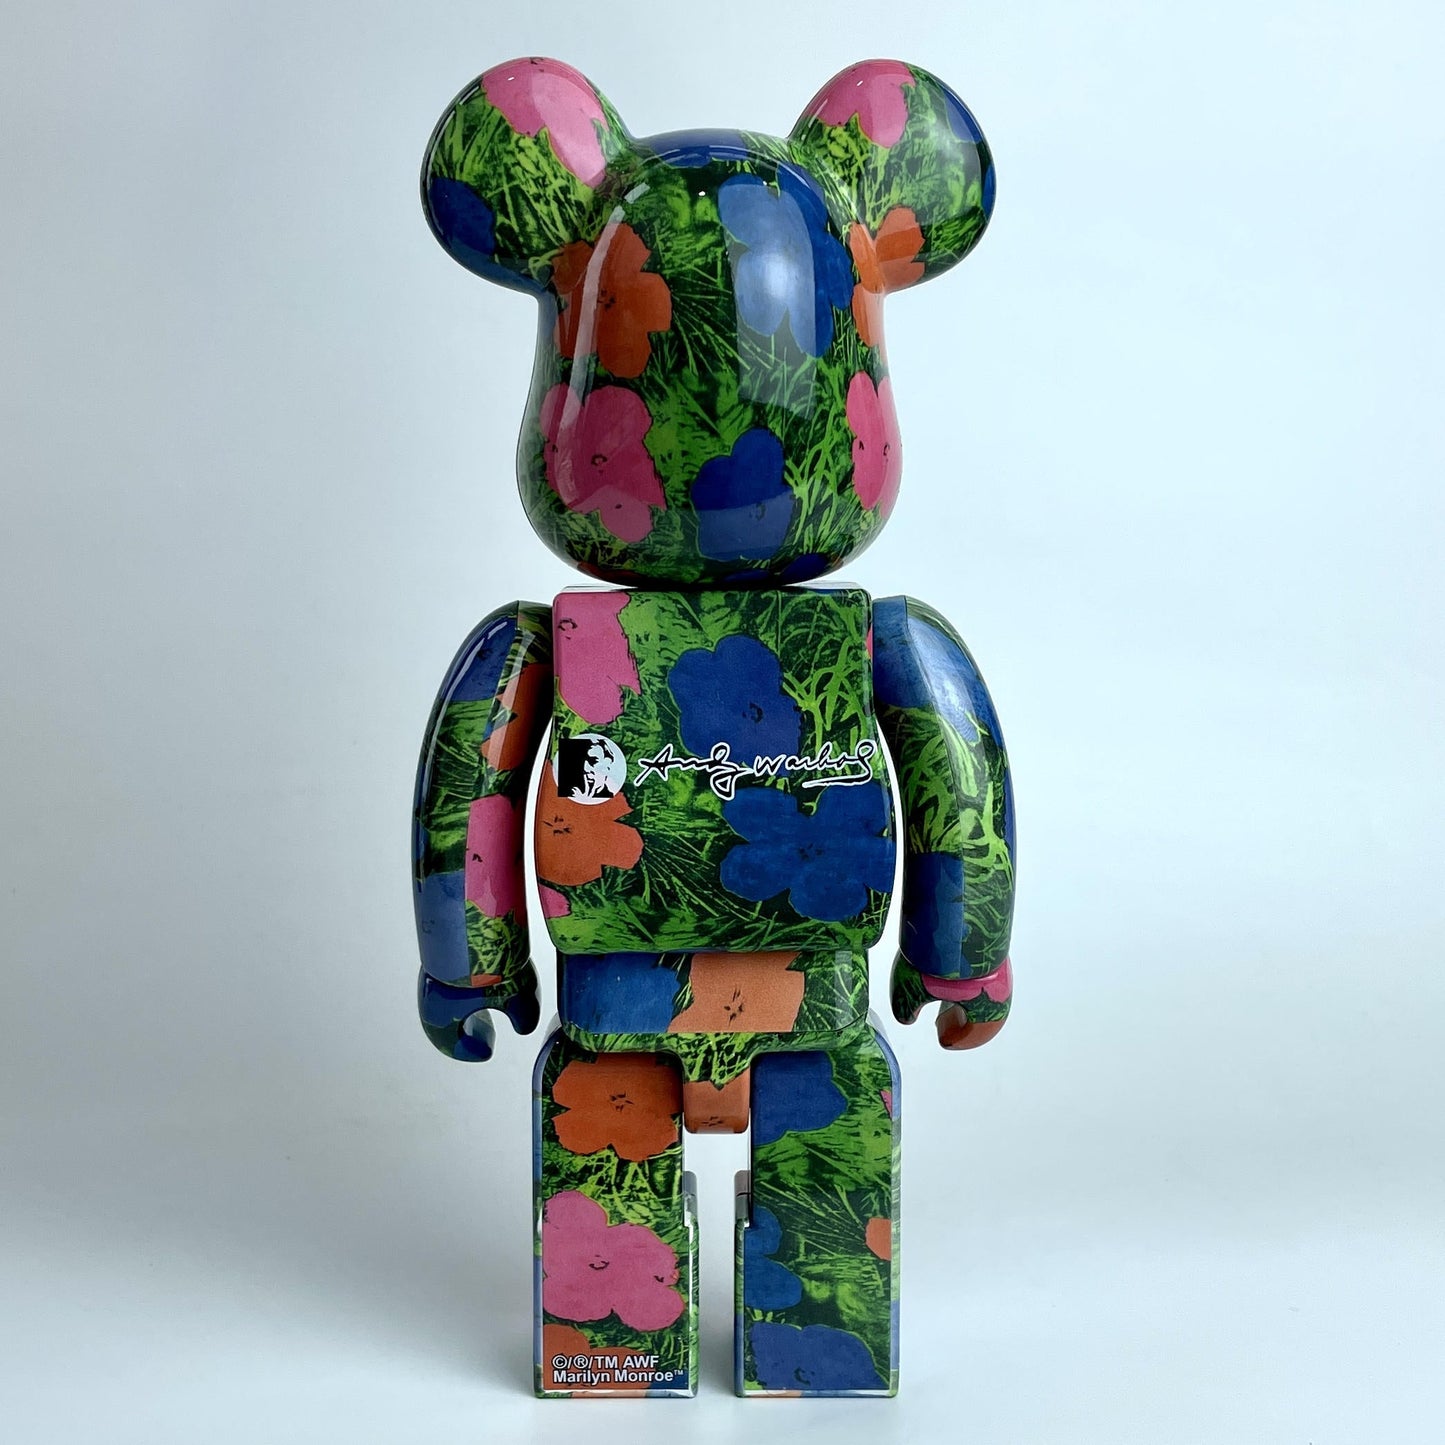 28cm BEARBRICK 400% Andy Wahol Flower ABS Action Figure Boxed-FuGui Tide play